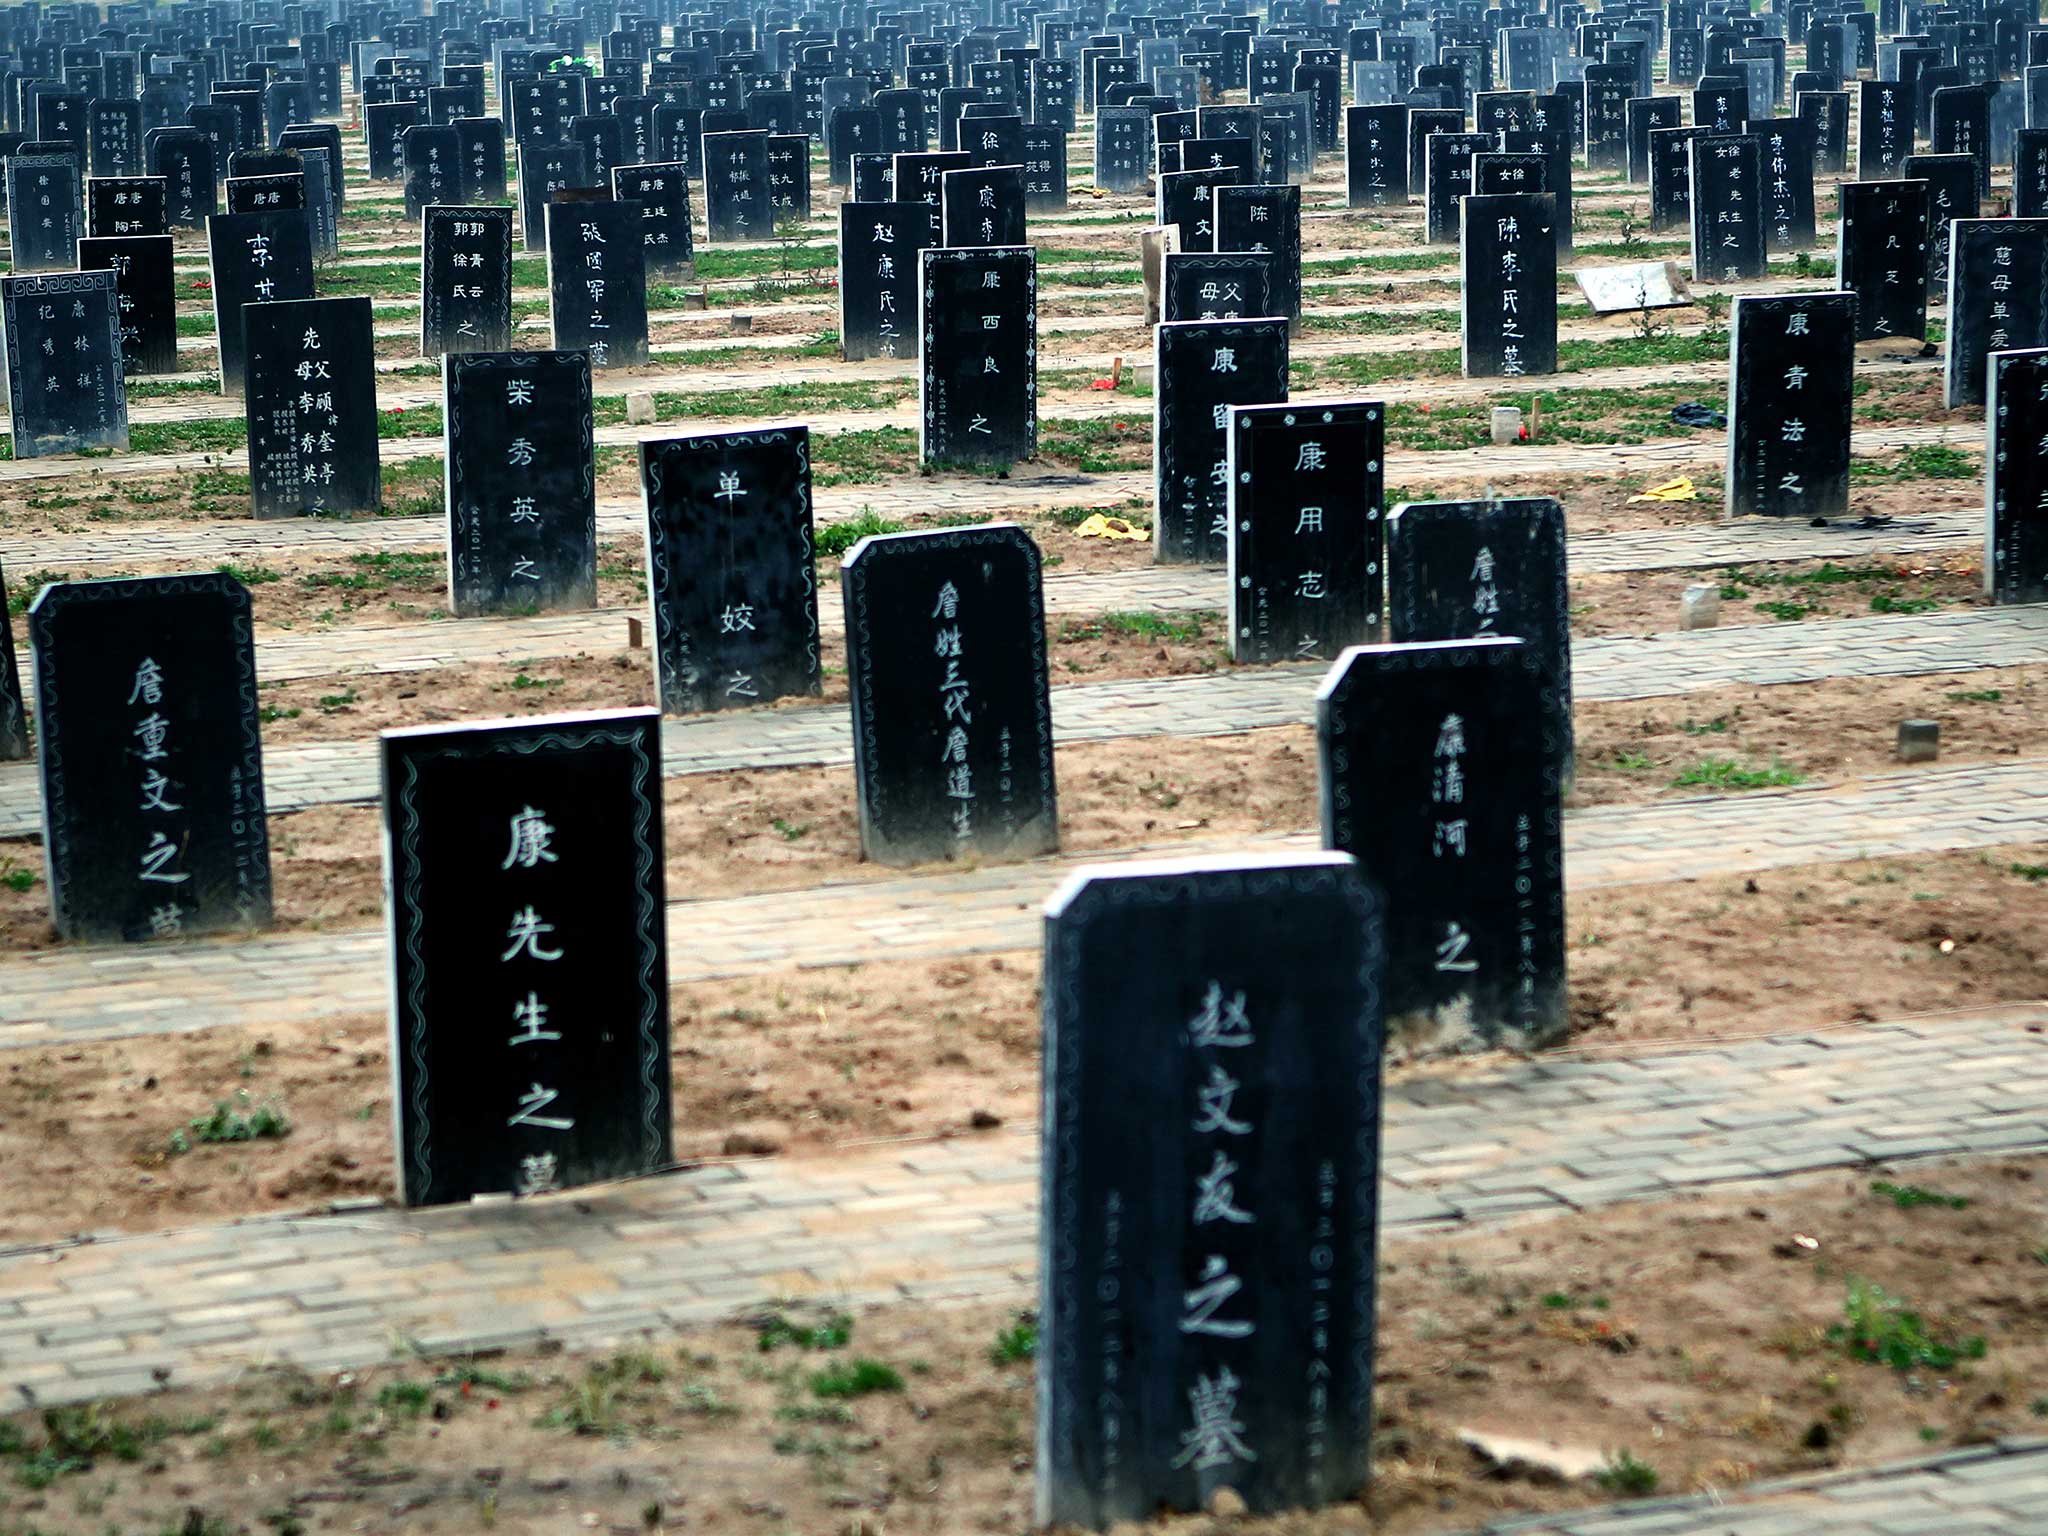 A graveyard in China